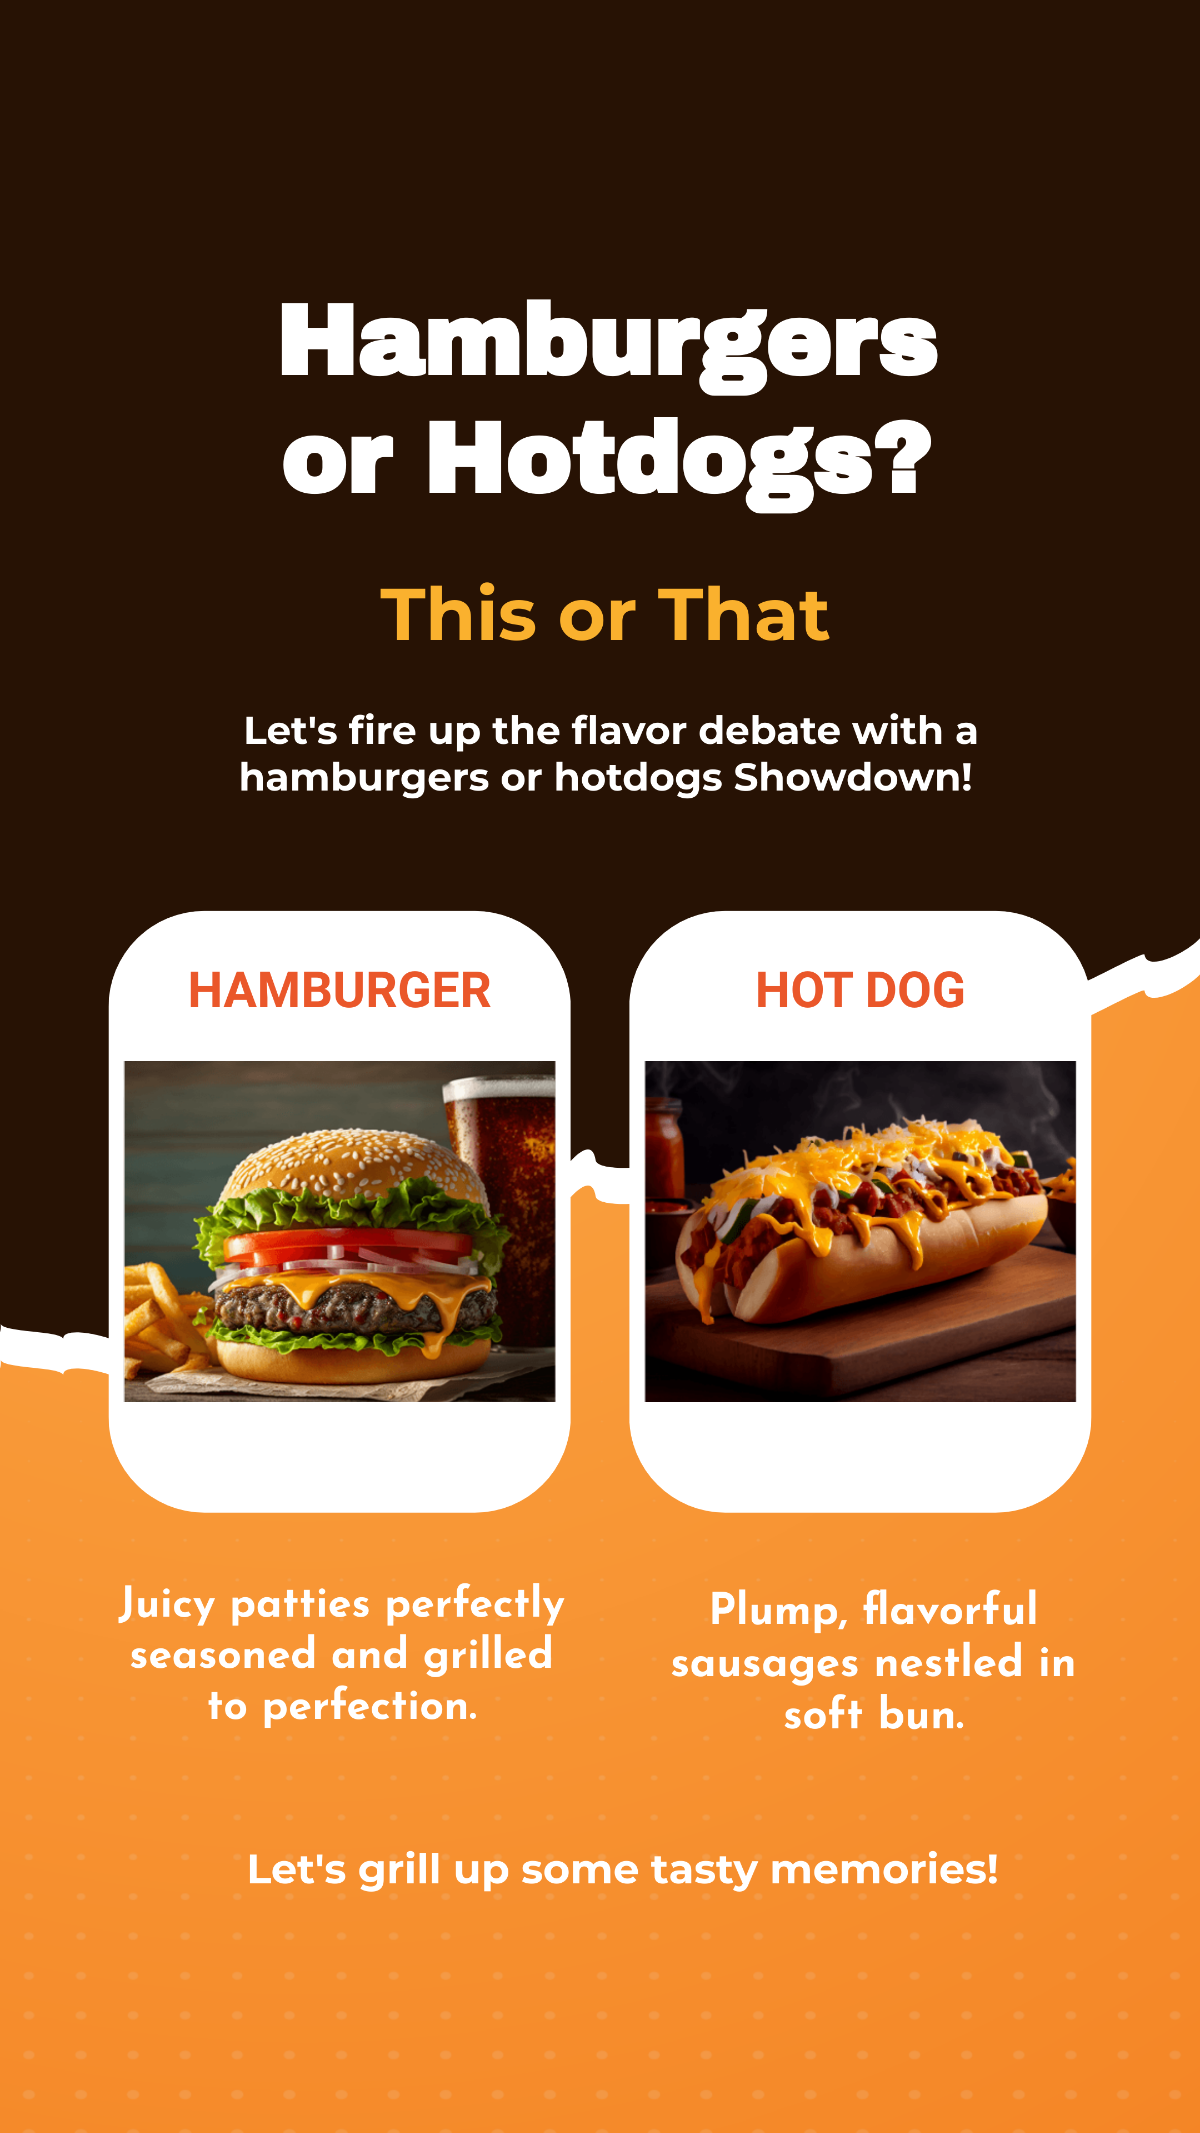 Hamburgers or Hotdogs This or That Instagram Story